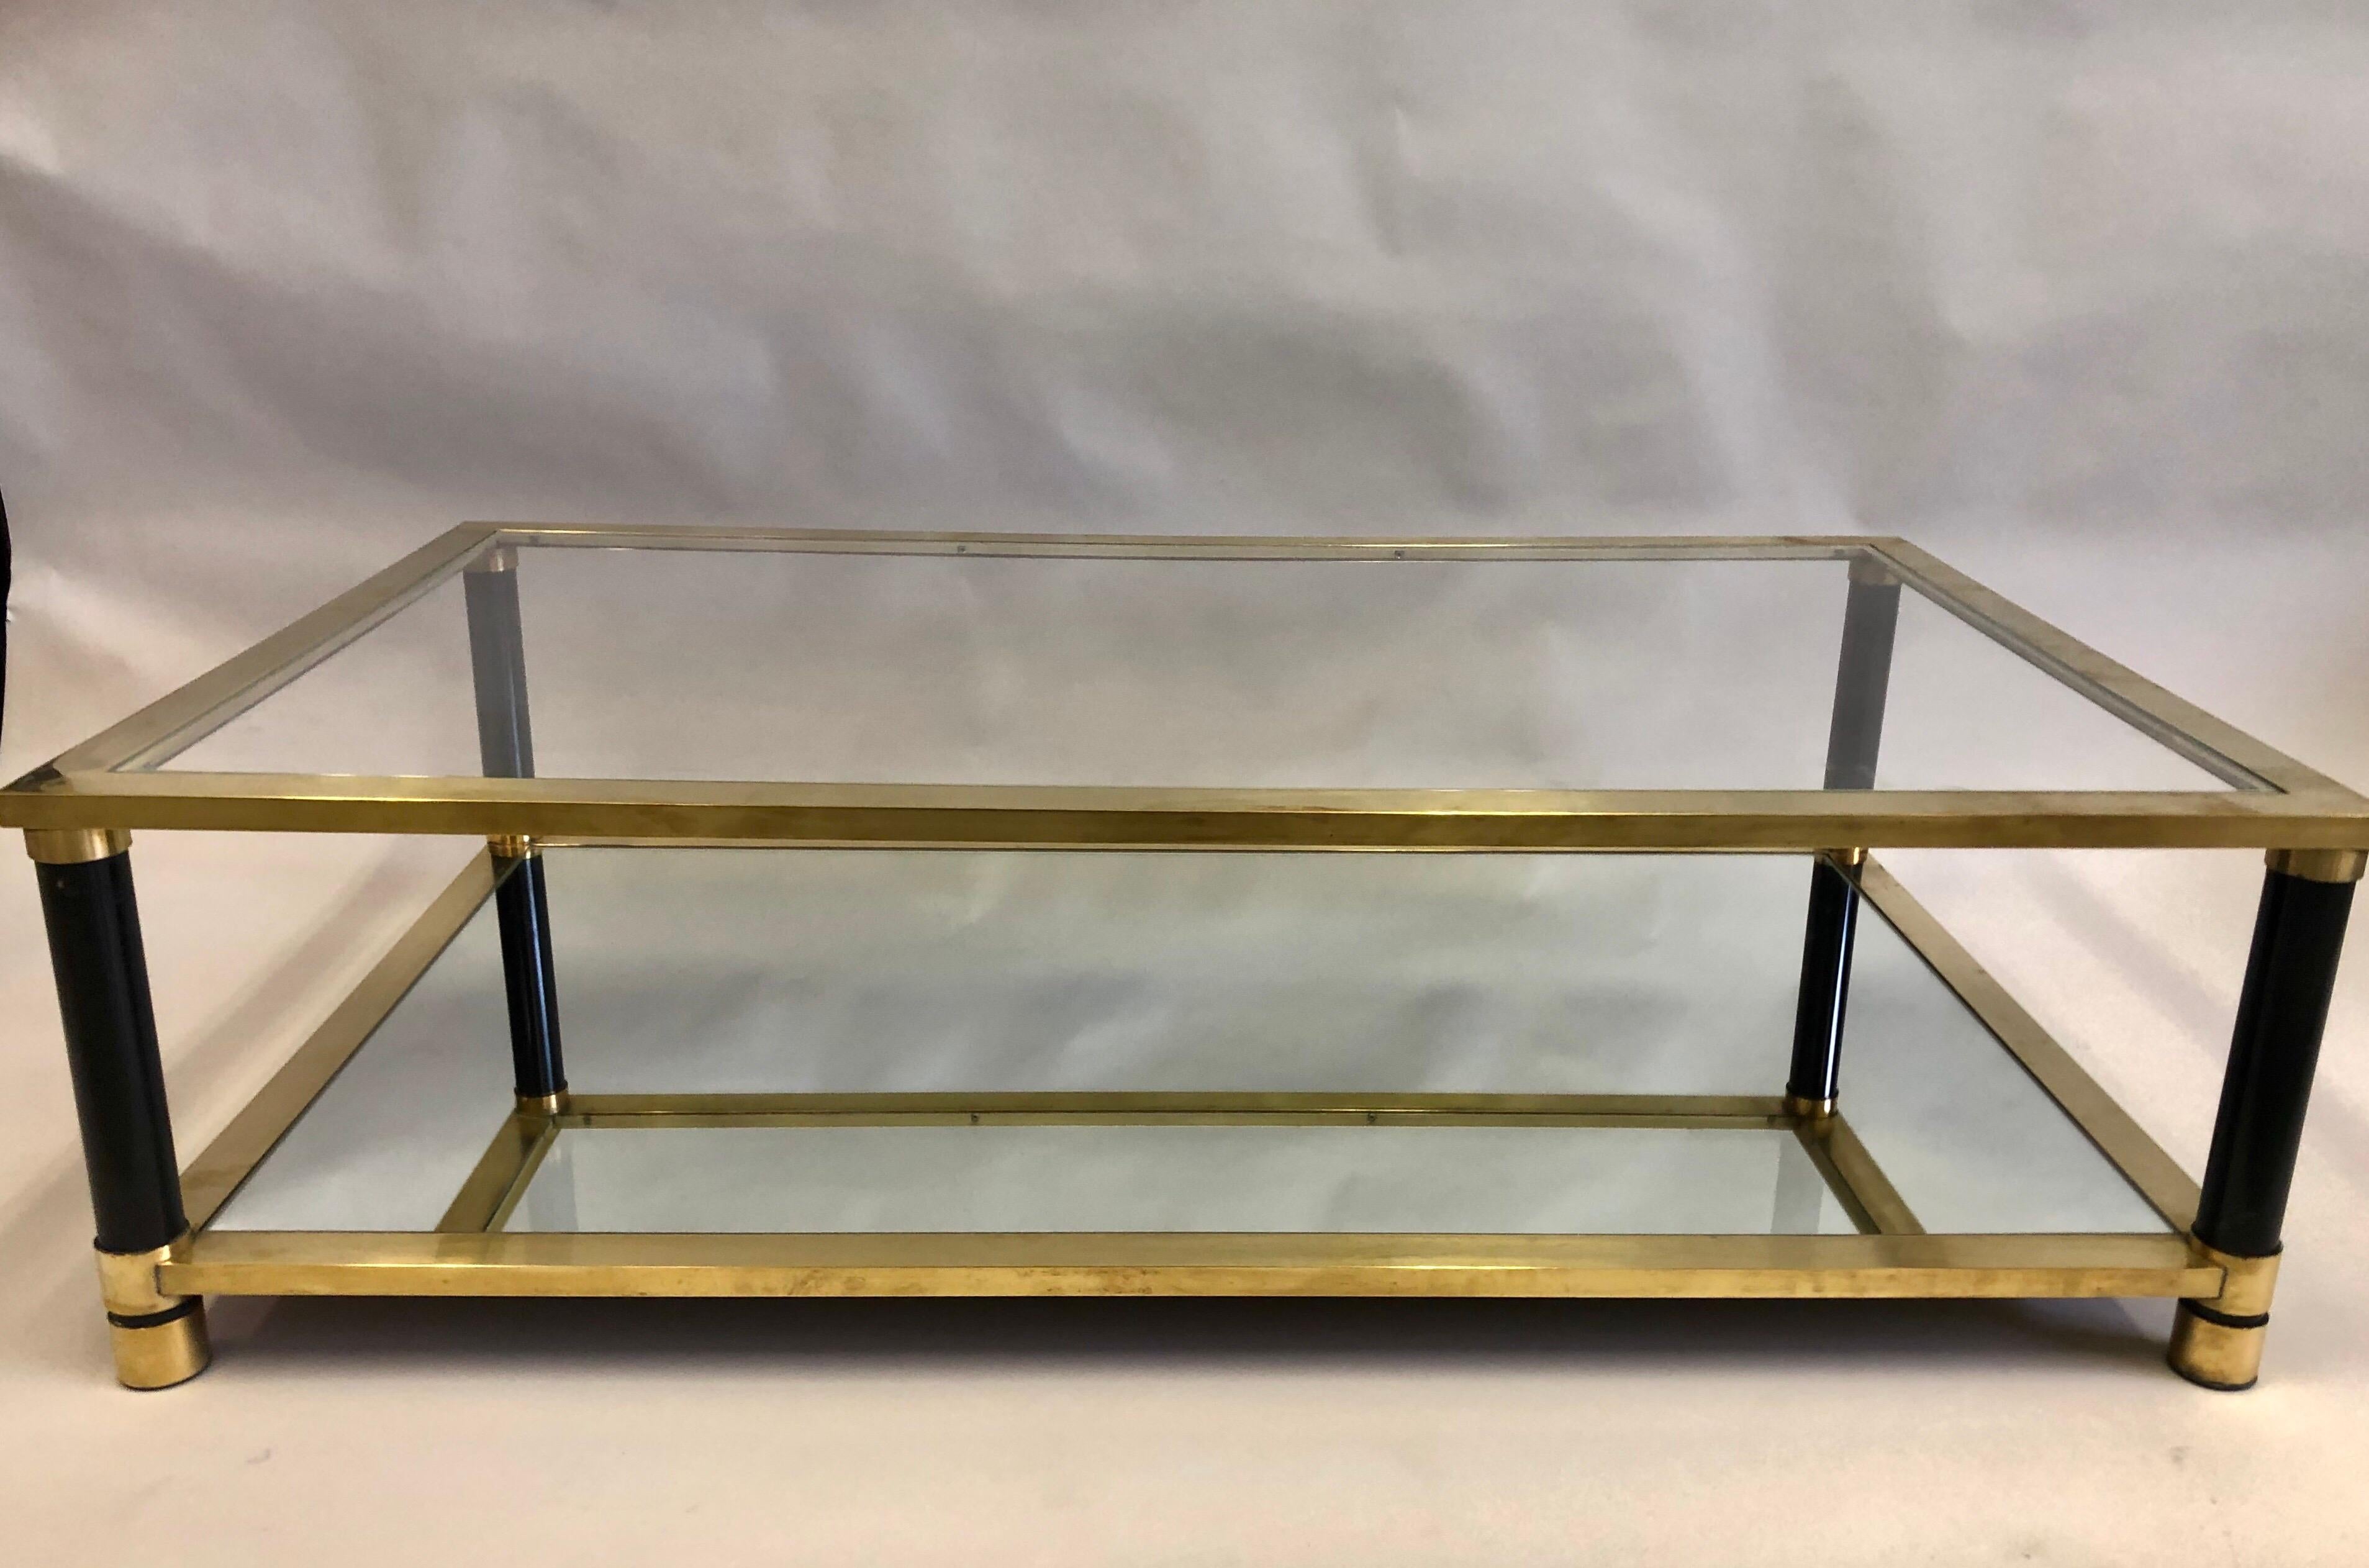 20th Century Large French Mid-Century Modern Double Level Brass Coffee Table, Maison Charles